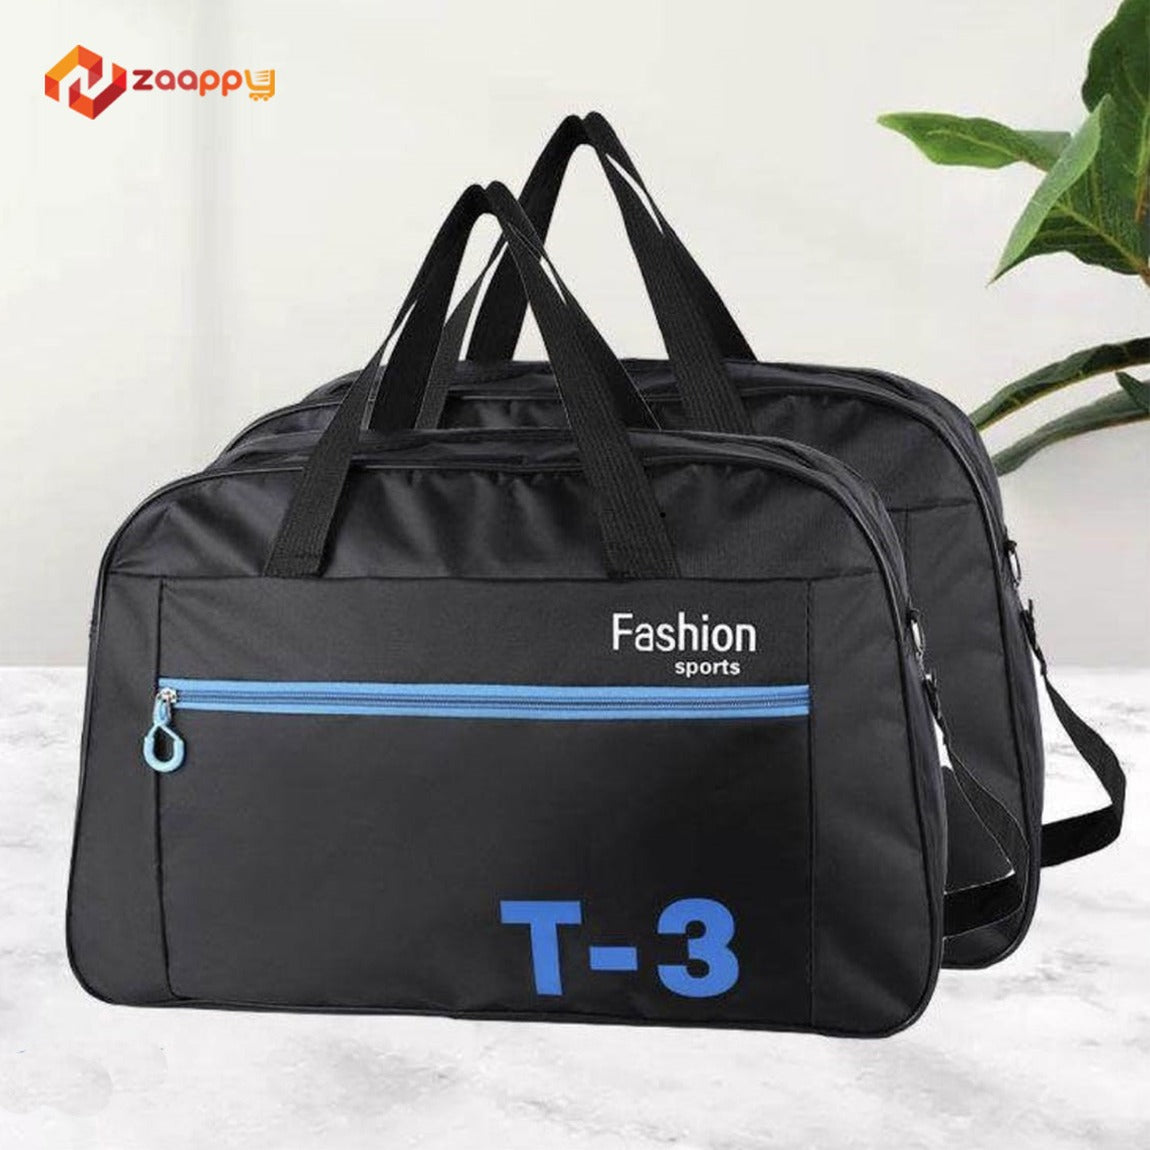  Stylish Black T-3 Sports And Athletic Gear Bag For Men Zaappy.com